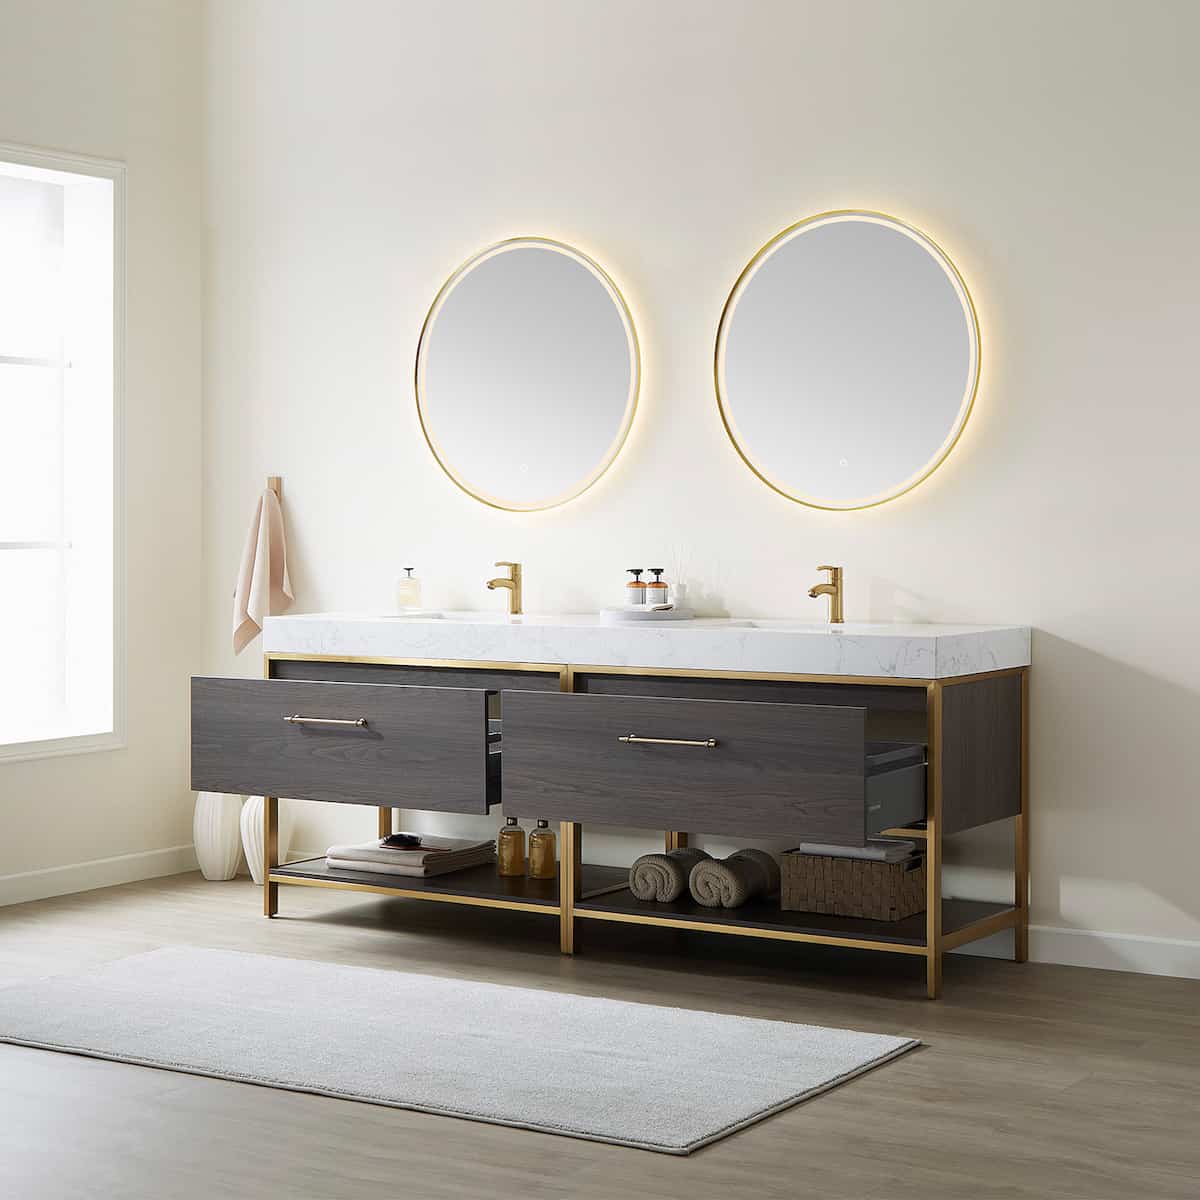 Vinnova Palma 84 Inch Freestanding Double Sink Bath Vanity in Suleiman Oak with White Composite Grain Stone With Mirrors Drawers 701284G-SO-GW